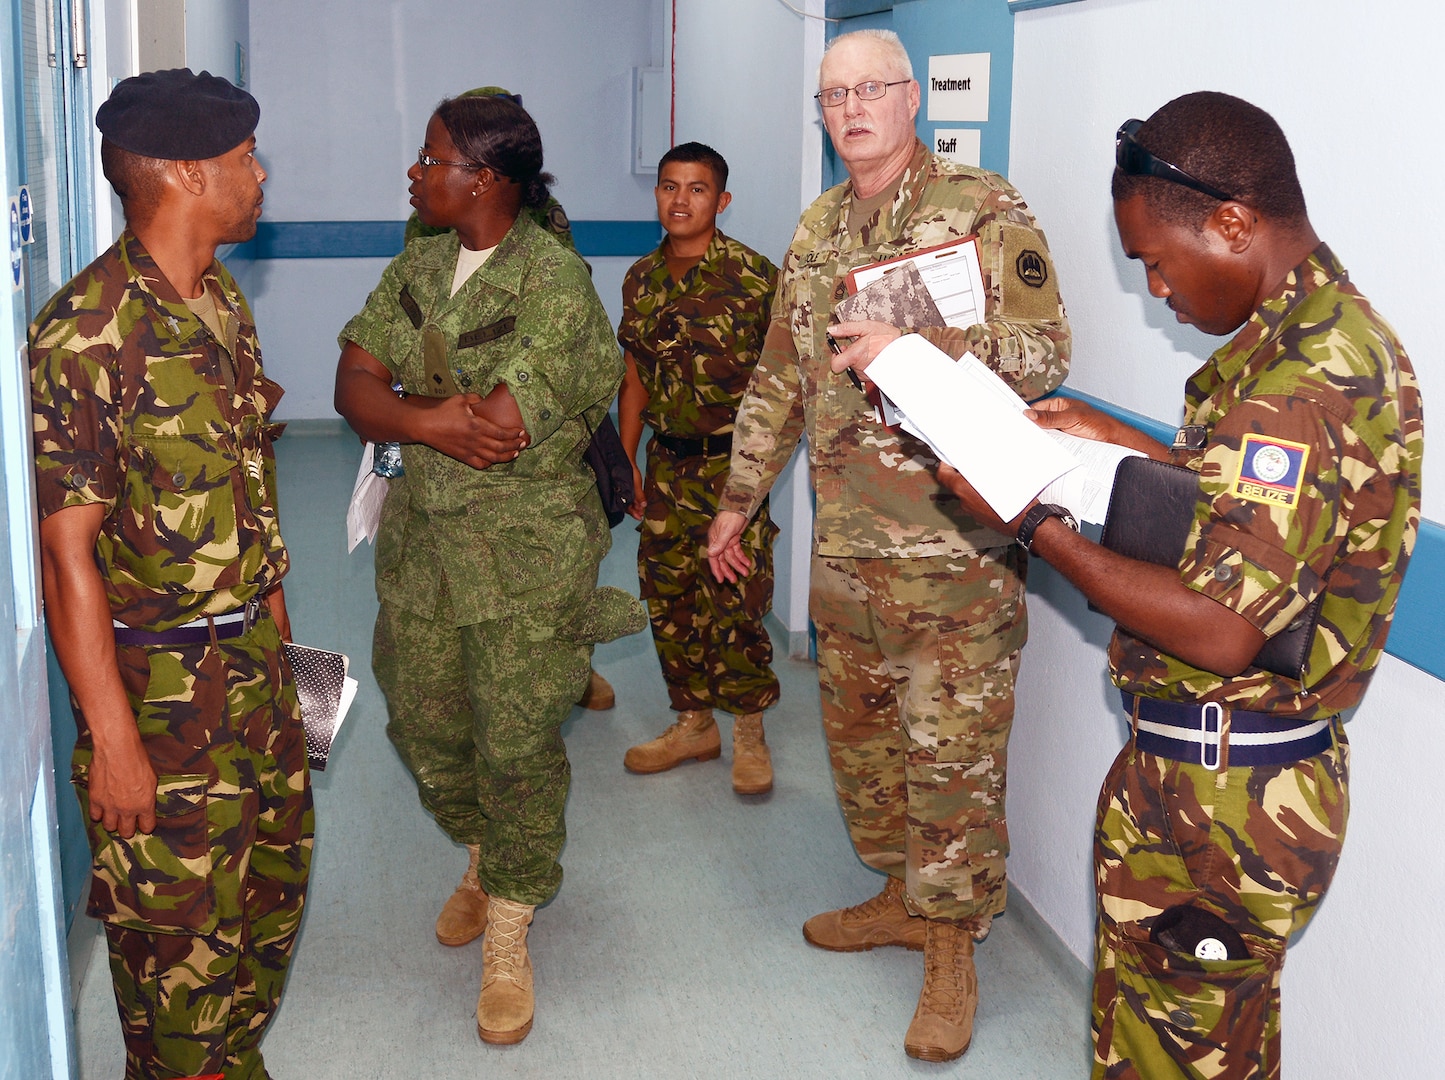 Master Sgt. Joseph Cole (center), from the U.S. Army’s Louisiana National Guard's Construction Facility Management Office, and service members from the Belize Defence Force, participate in a site survey and facility assessment exercise of a military hospital in Belize City May 9.